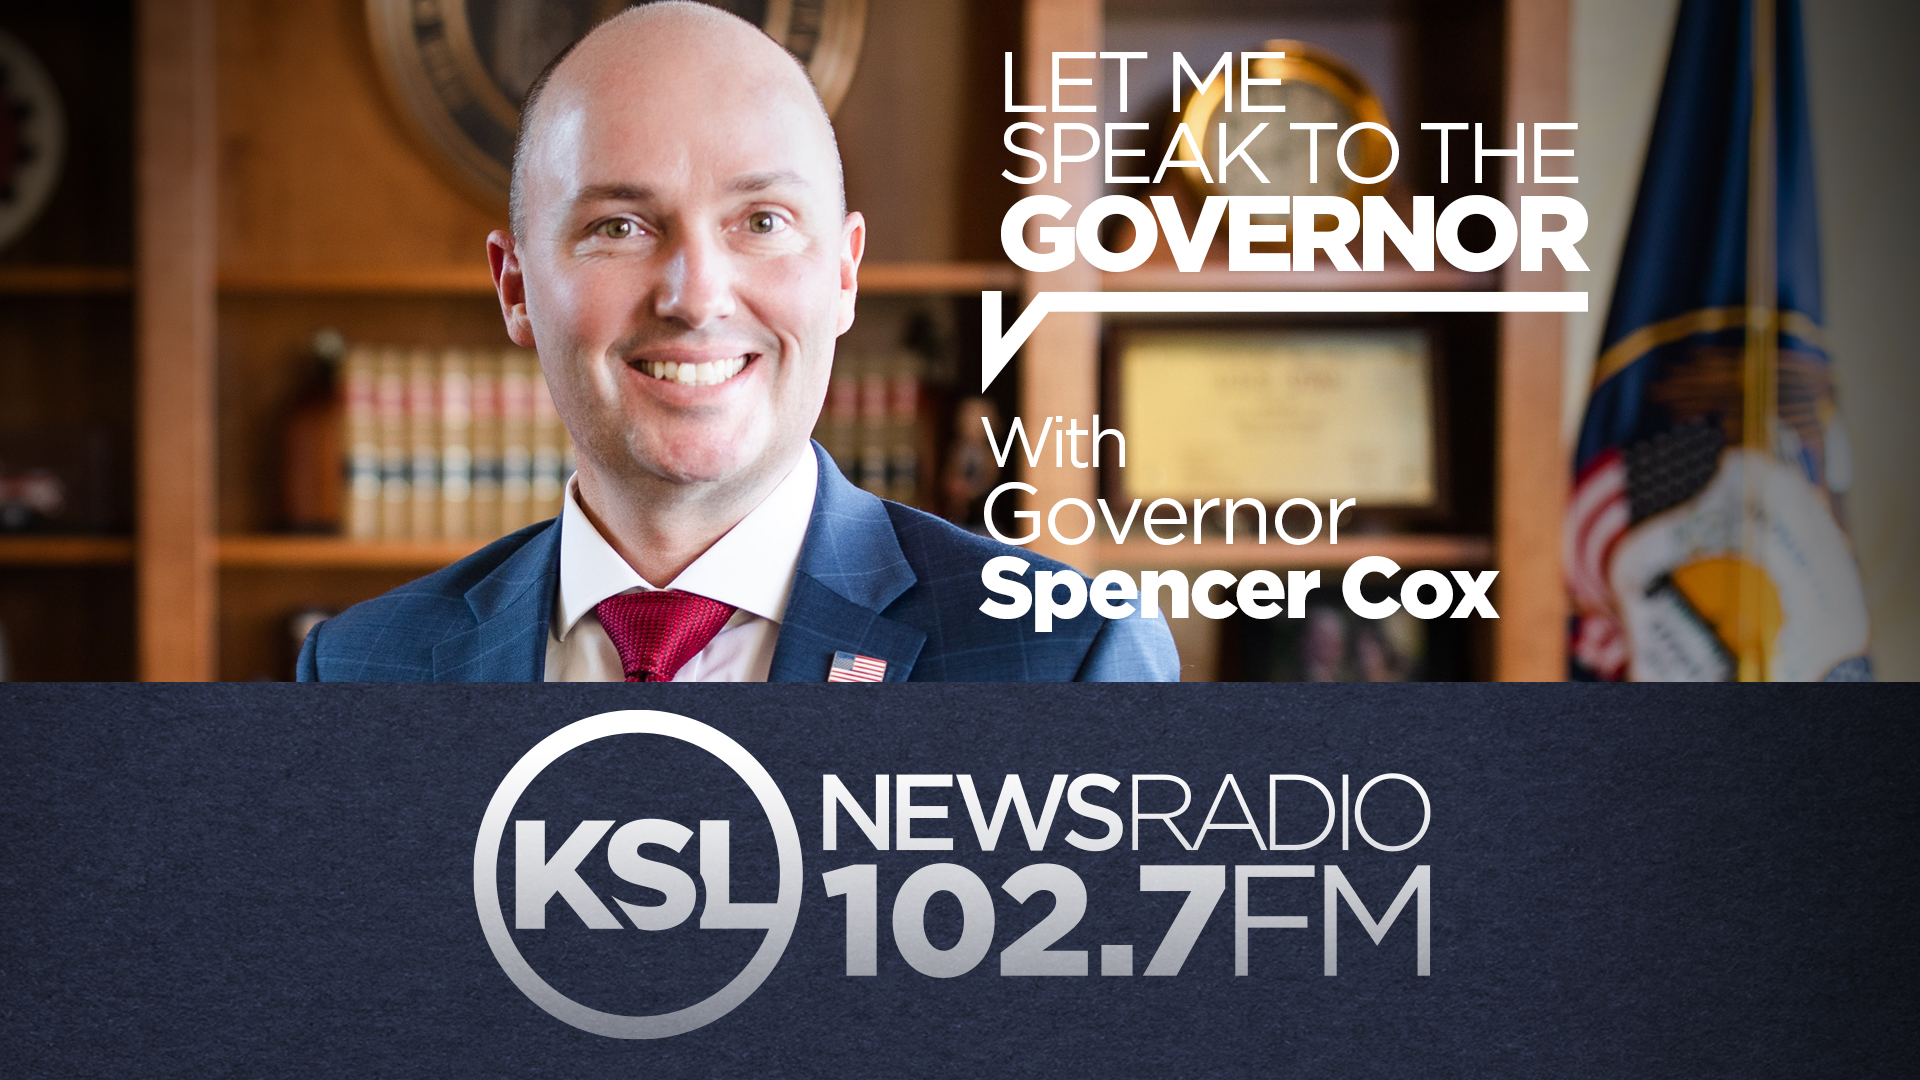 governor spencer cox joins on let me speak to the governor...